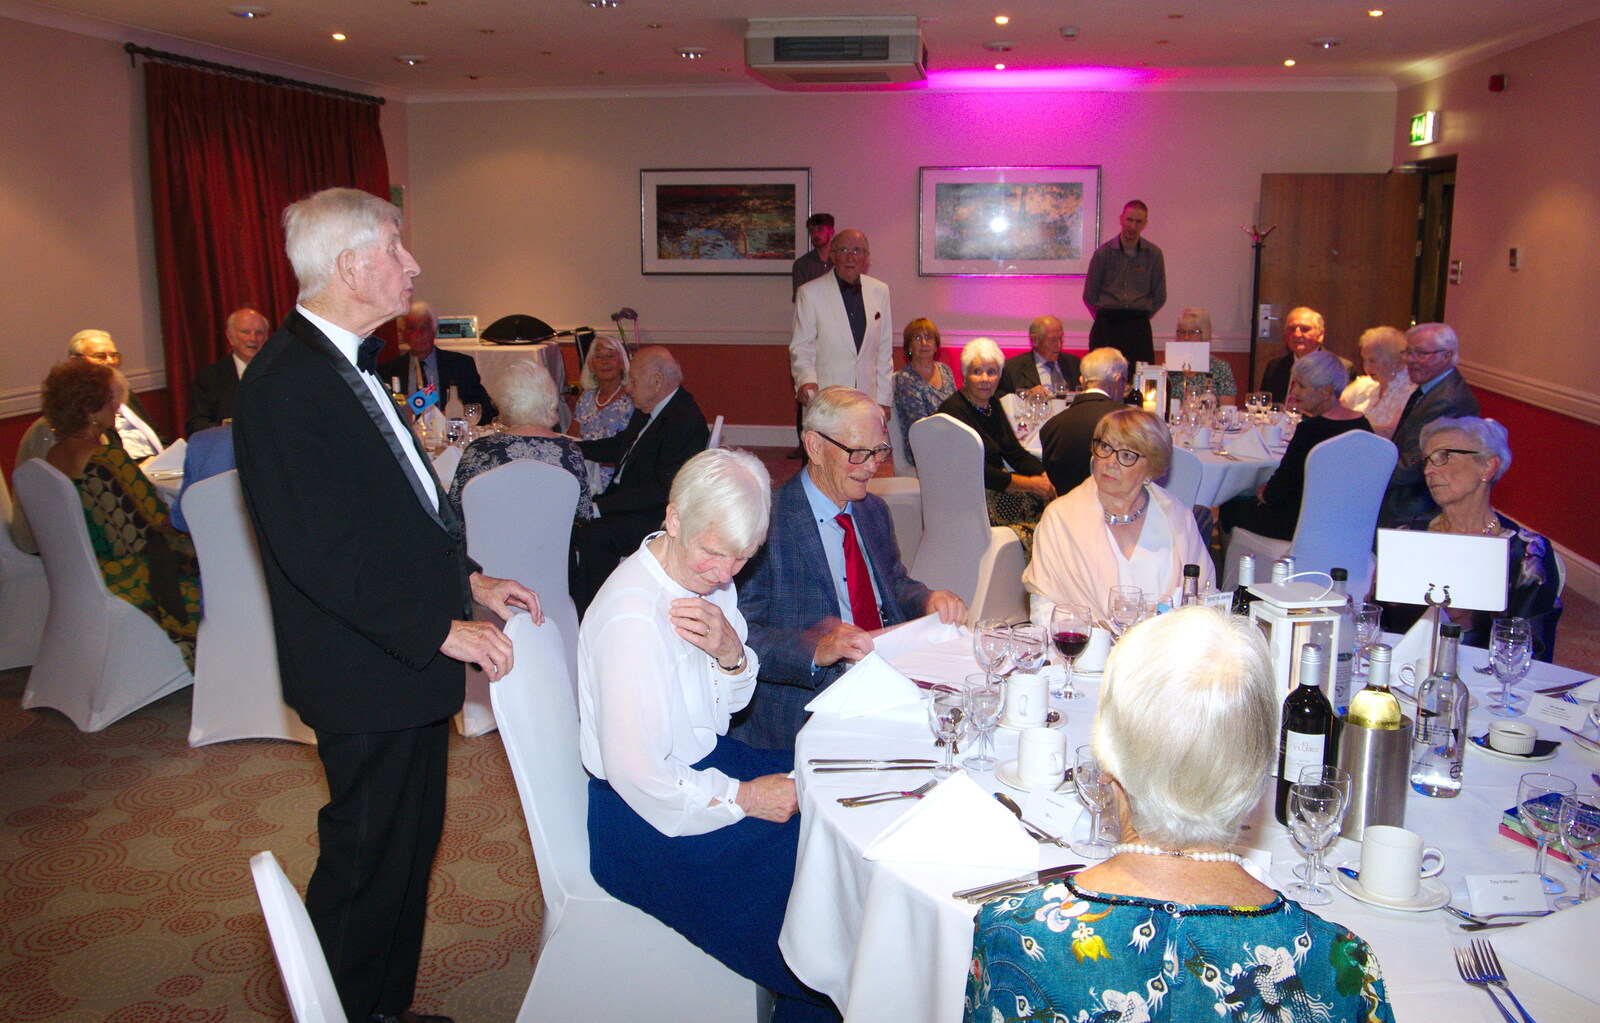 A pre-dinner introduction from Kenilworth Castle and the 69th Entry Reunion Dinner, Stratford, Warwickshire - 14th September 2019